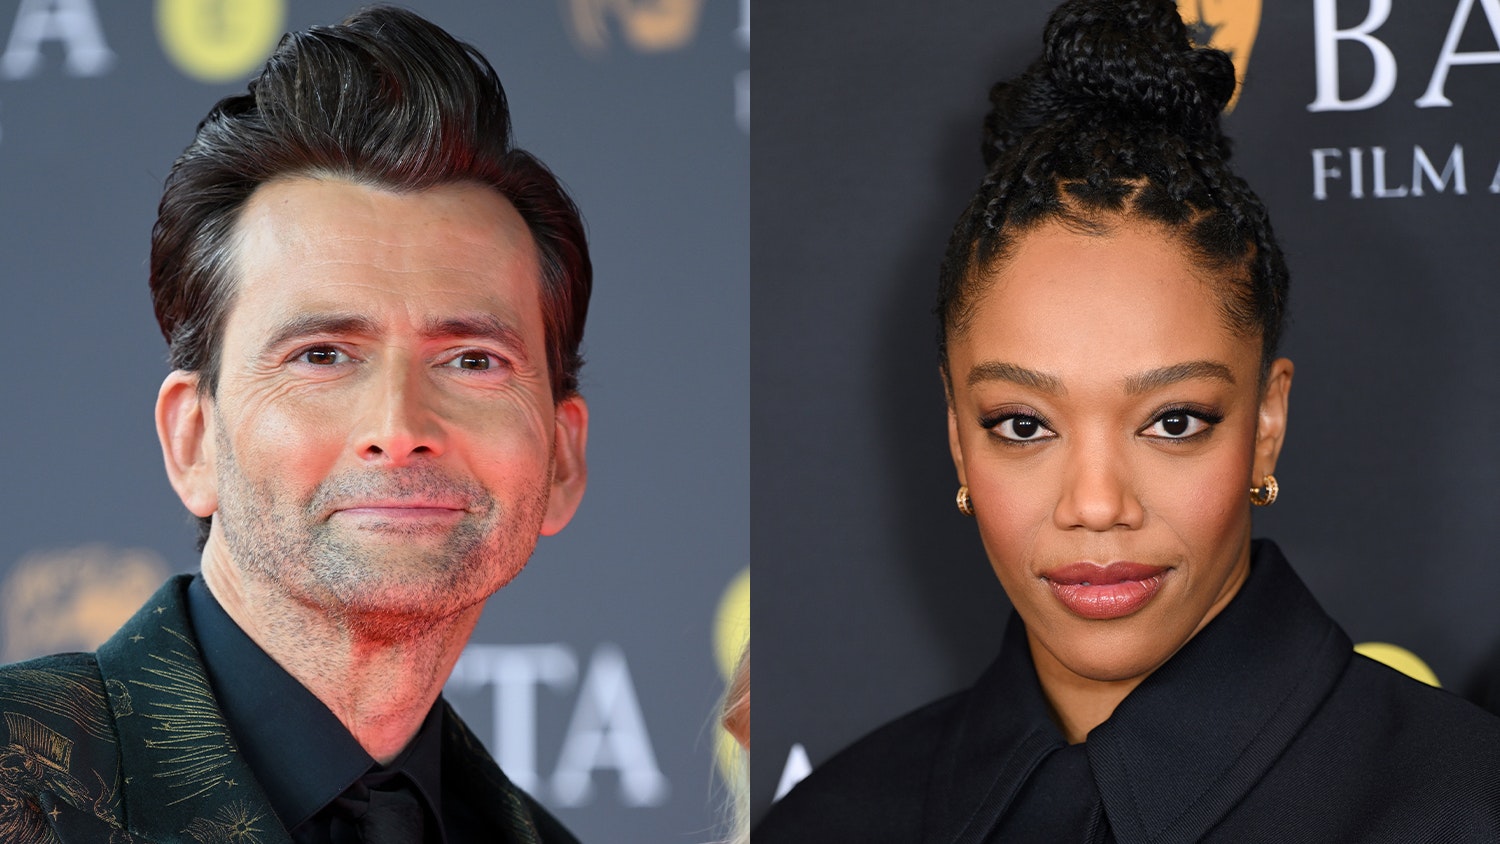 The cast of “The Thursday Murder Club” expands to include David Tennant, Naomi Ackie and more